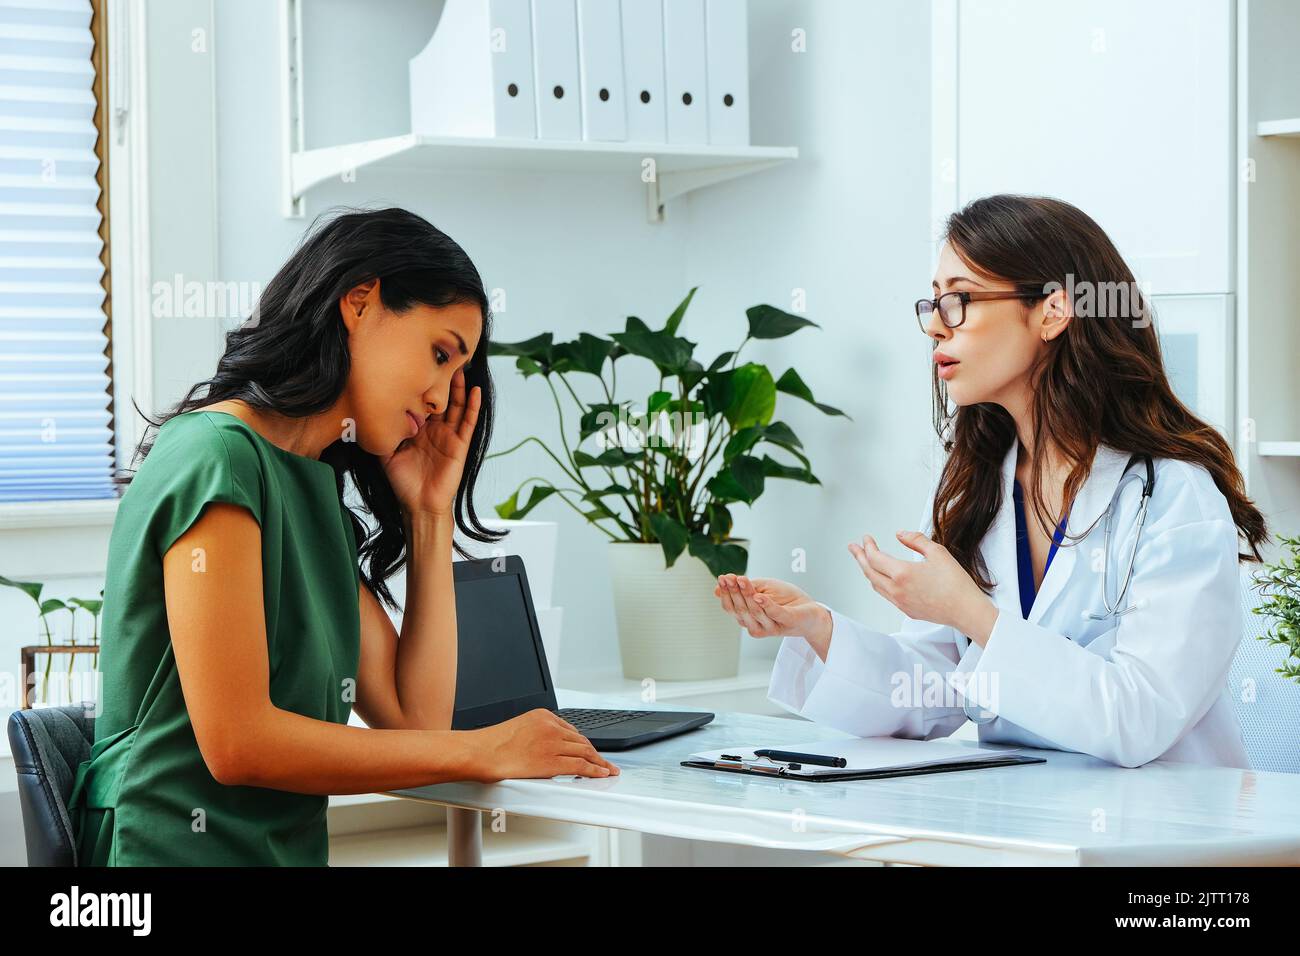 young female doctor explaining treatment to worried woman patient at health checkup Stock Photo